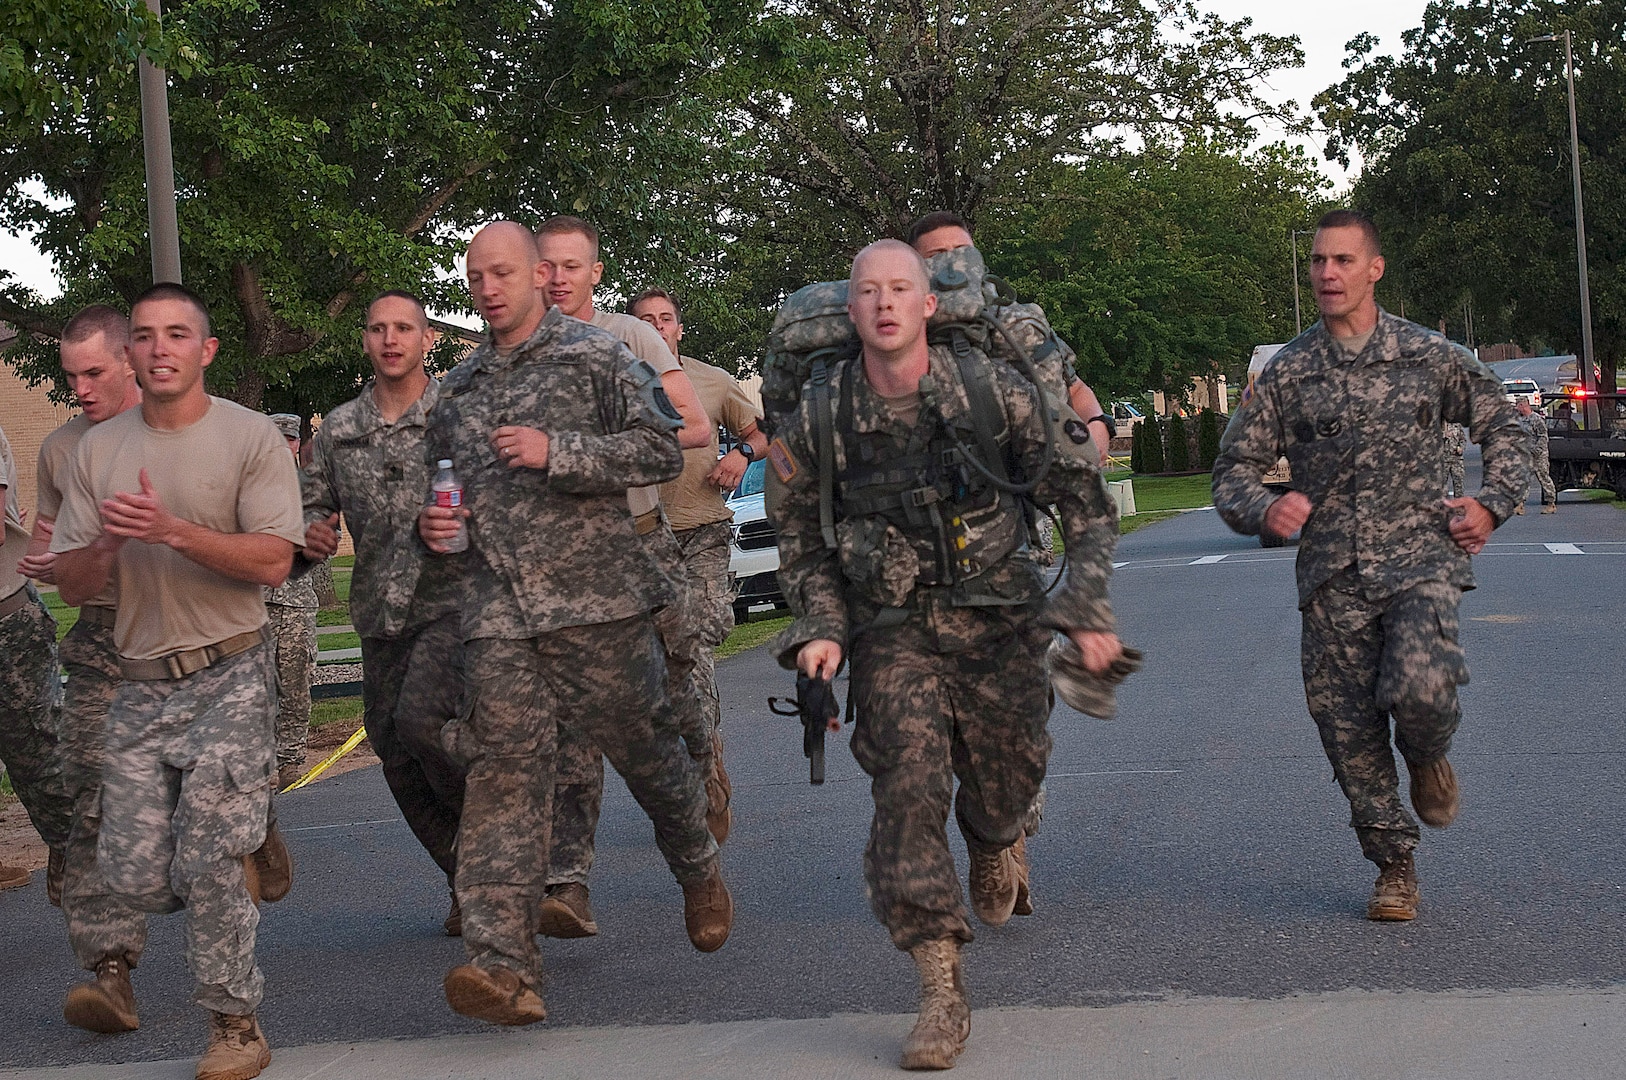 Competitors in 2014 Army National Guard Best Warrior Competition cross the finish line of the ruck march portion of the competition at Camp Joseph T. Robinson, Arkansas, July 16, 2014. The competition tested competitors on a variety of tactical and technical skills in a physically and mentally demanding environment as they vie to earn the title of Best Warrior and become the Soldier and Noncommissioned Officer of the Year for the Army Guard. The winners of the competition will go on to represent the Army Guard in the Department of the Army level Best Warrior Competition later this year. 